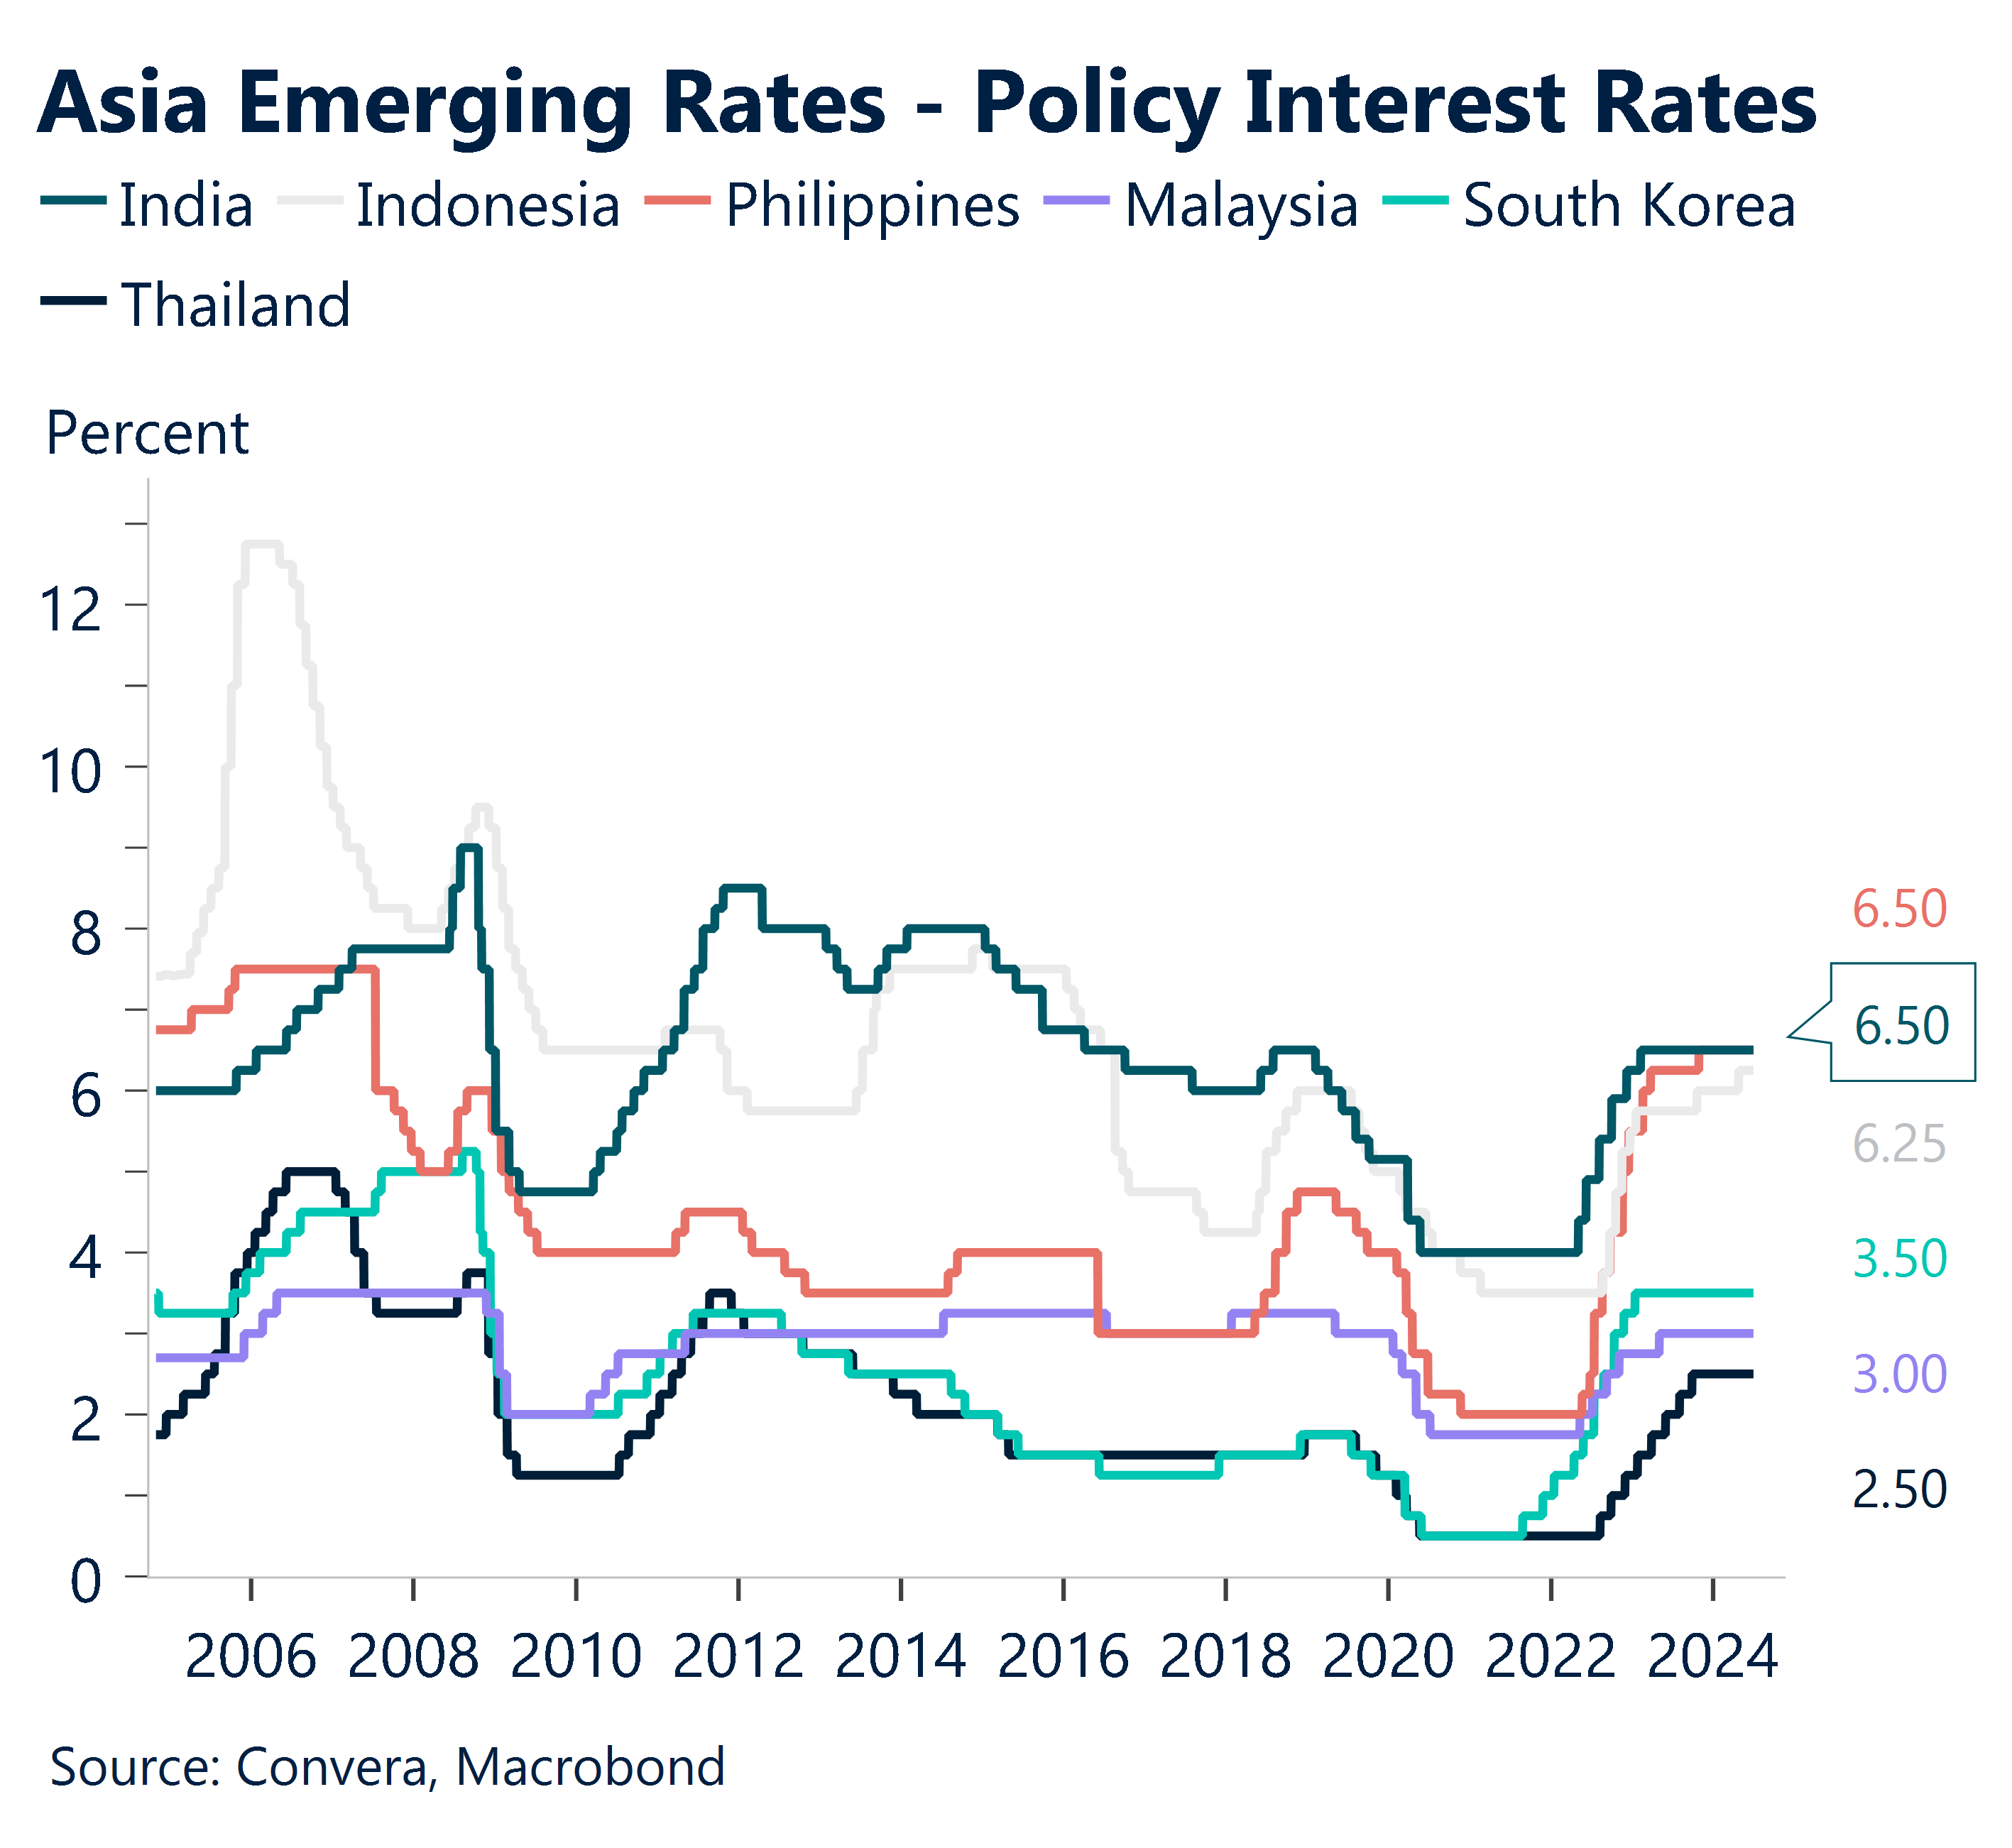 Chart showing Asia emerging rates versus policy interest rates